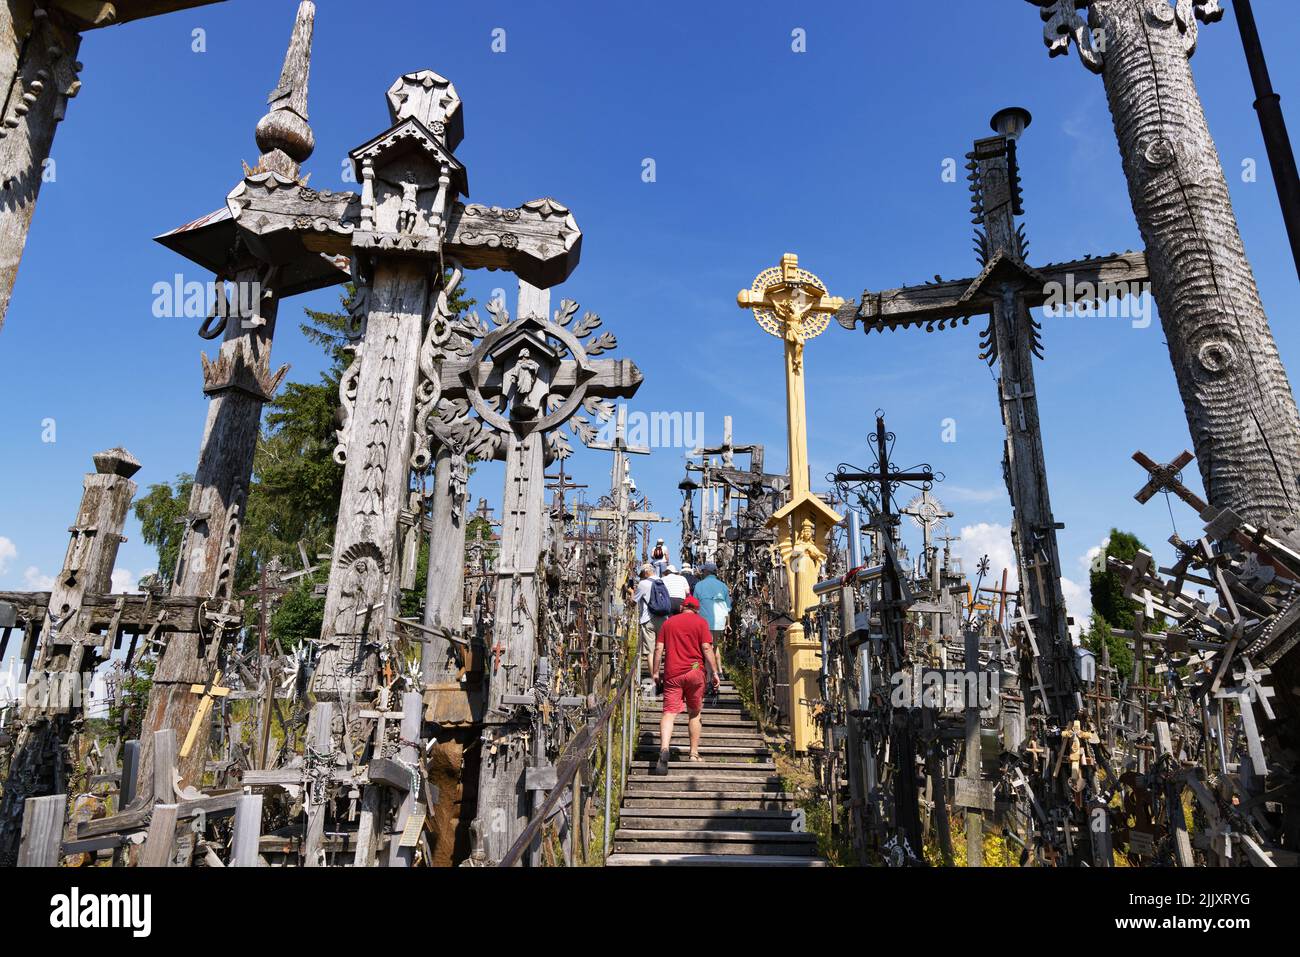 Lithuania tourists; people visiting the Hill of Crosses, a site of christian religious pilgrimage with many crosses and statues, Lithuania Europe Stock Photo